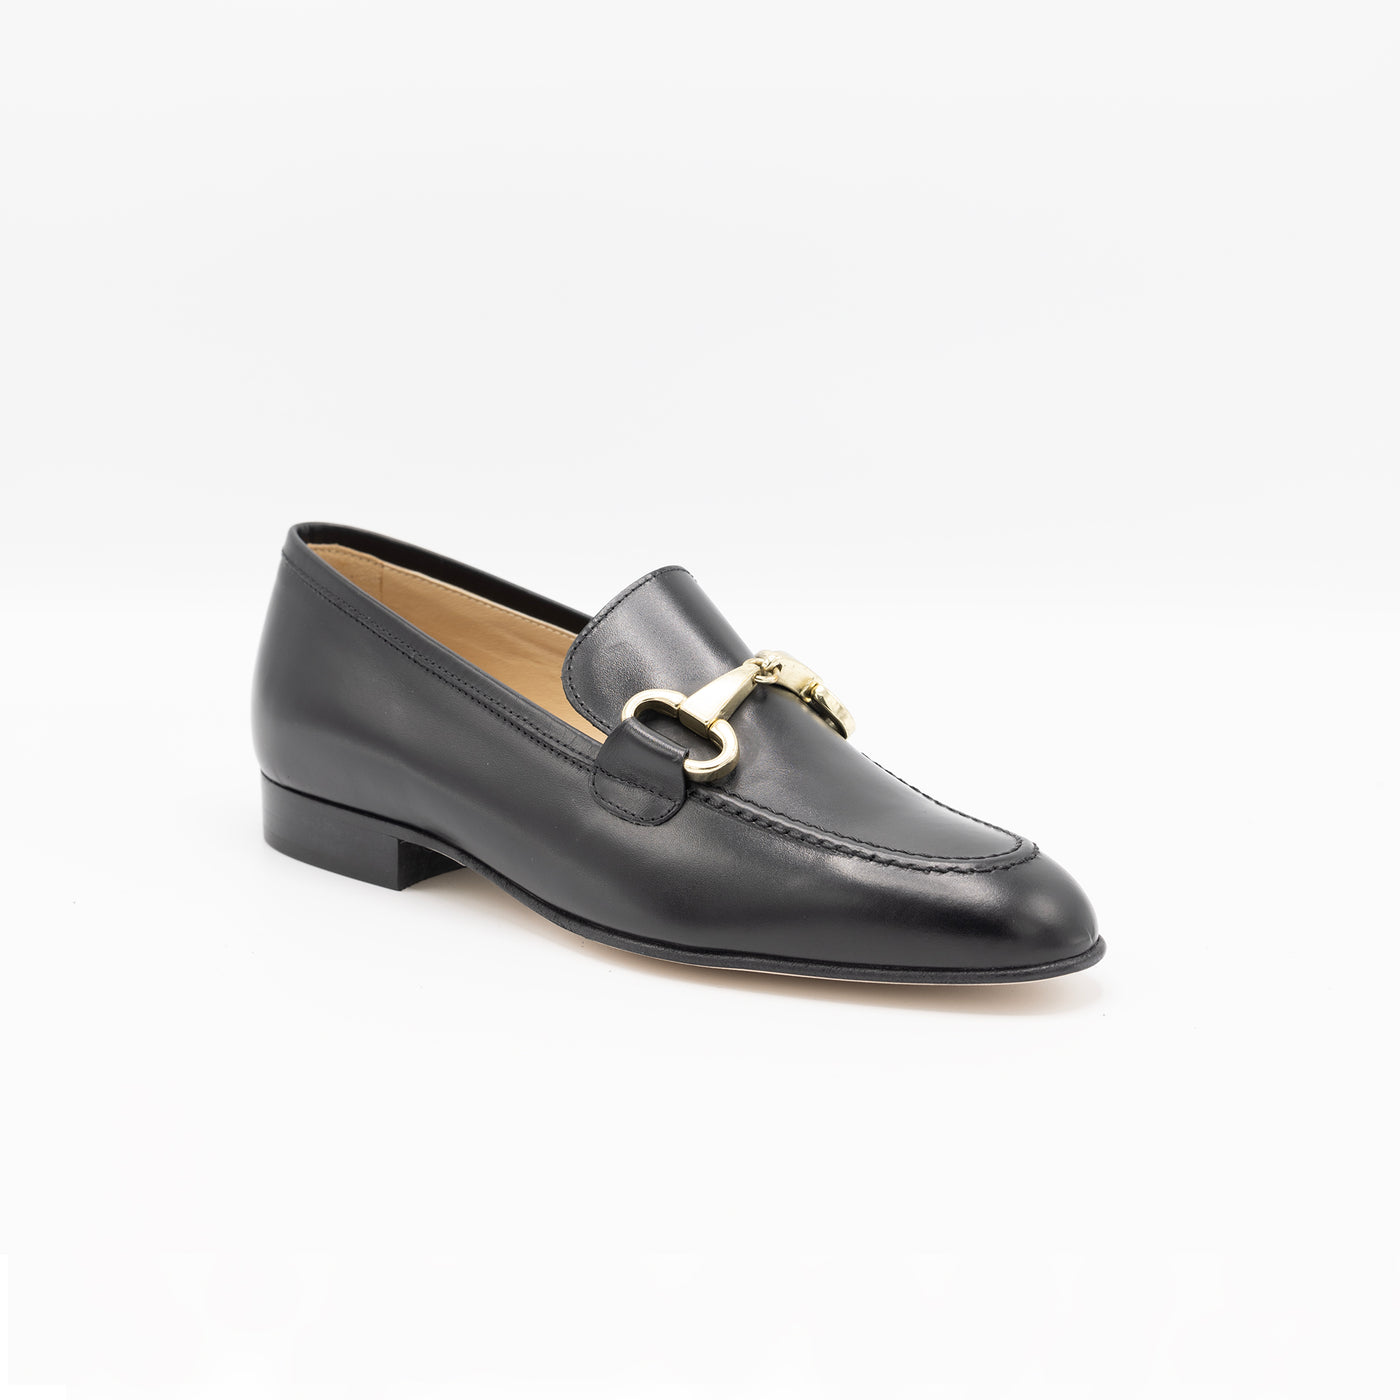 Classic embellished loafer in black leather.